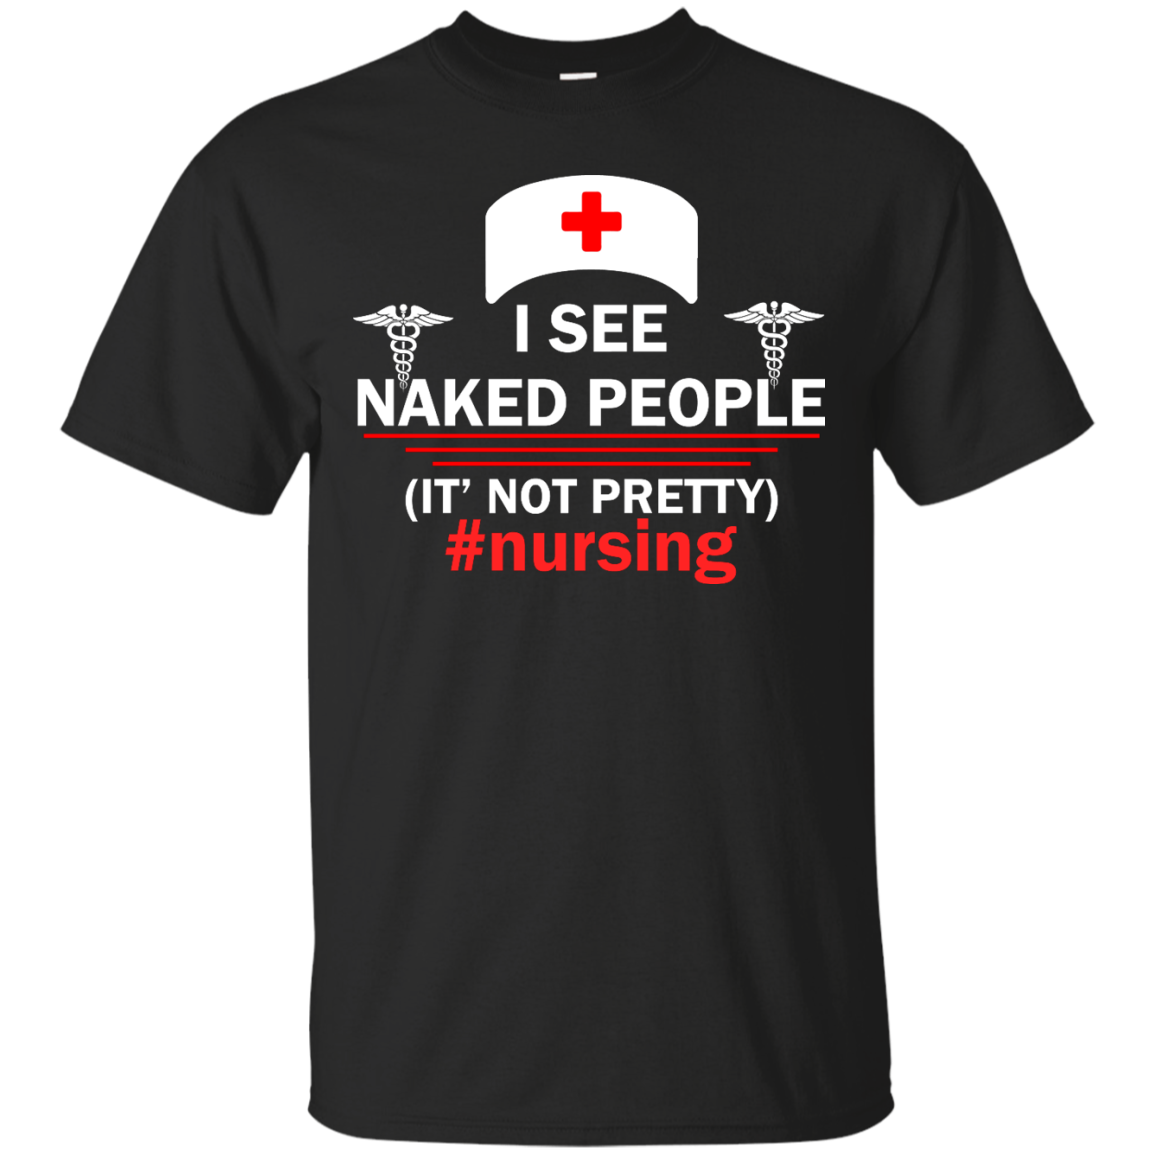 I See Naked People It's Not Pretty Nursing shirt, tank